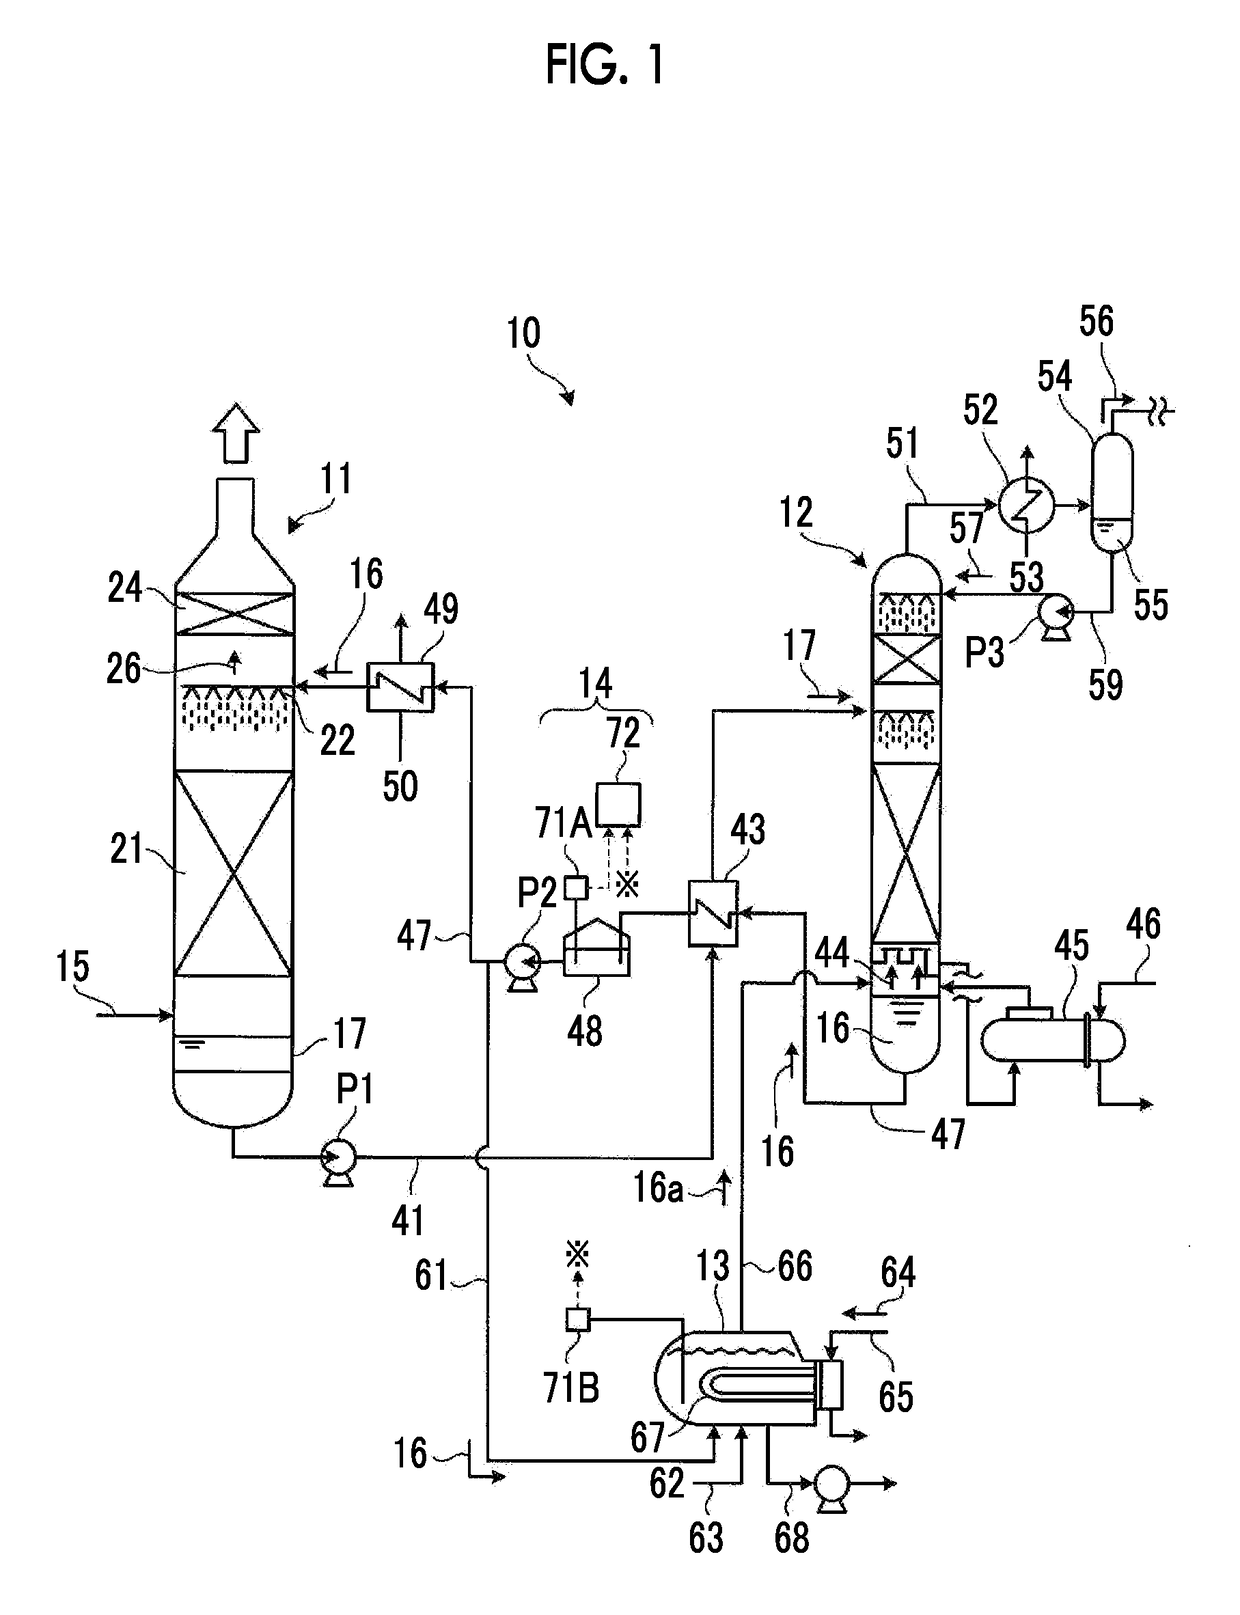 Degradant concentration measurement device and acidic gas removal device